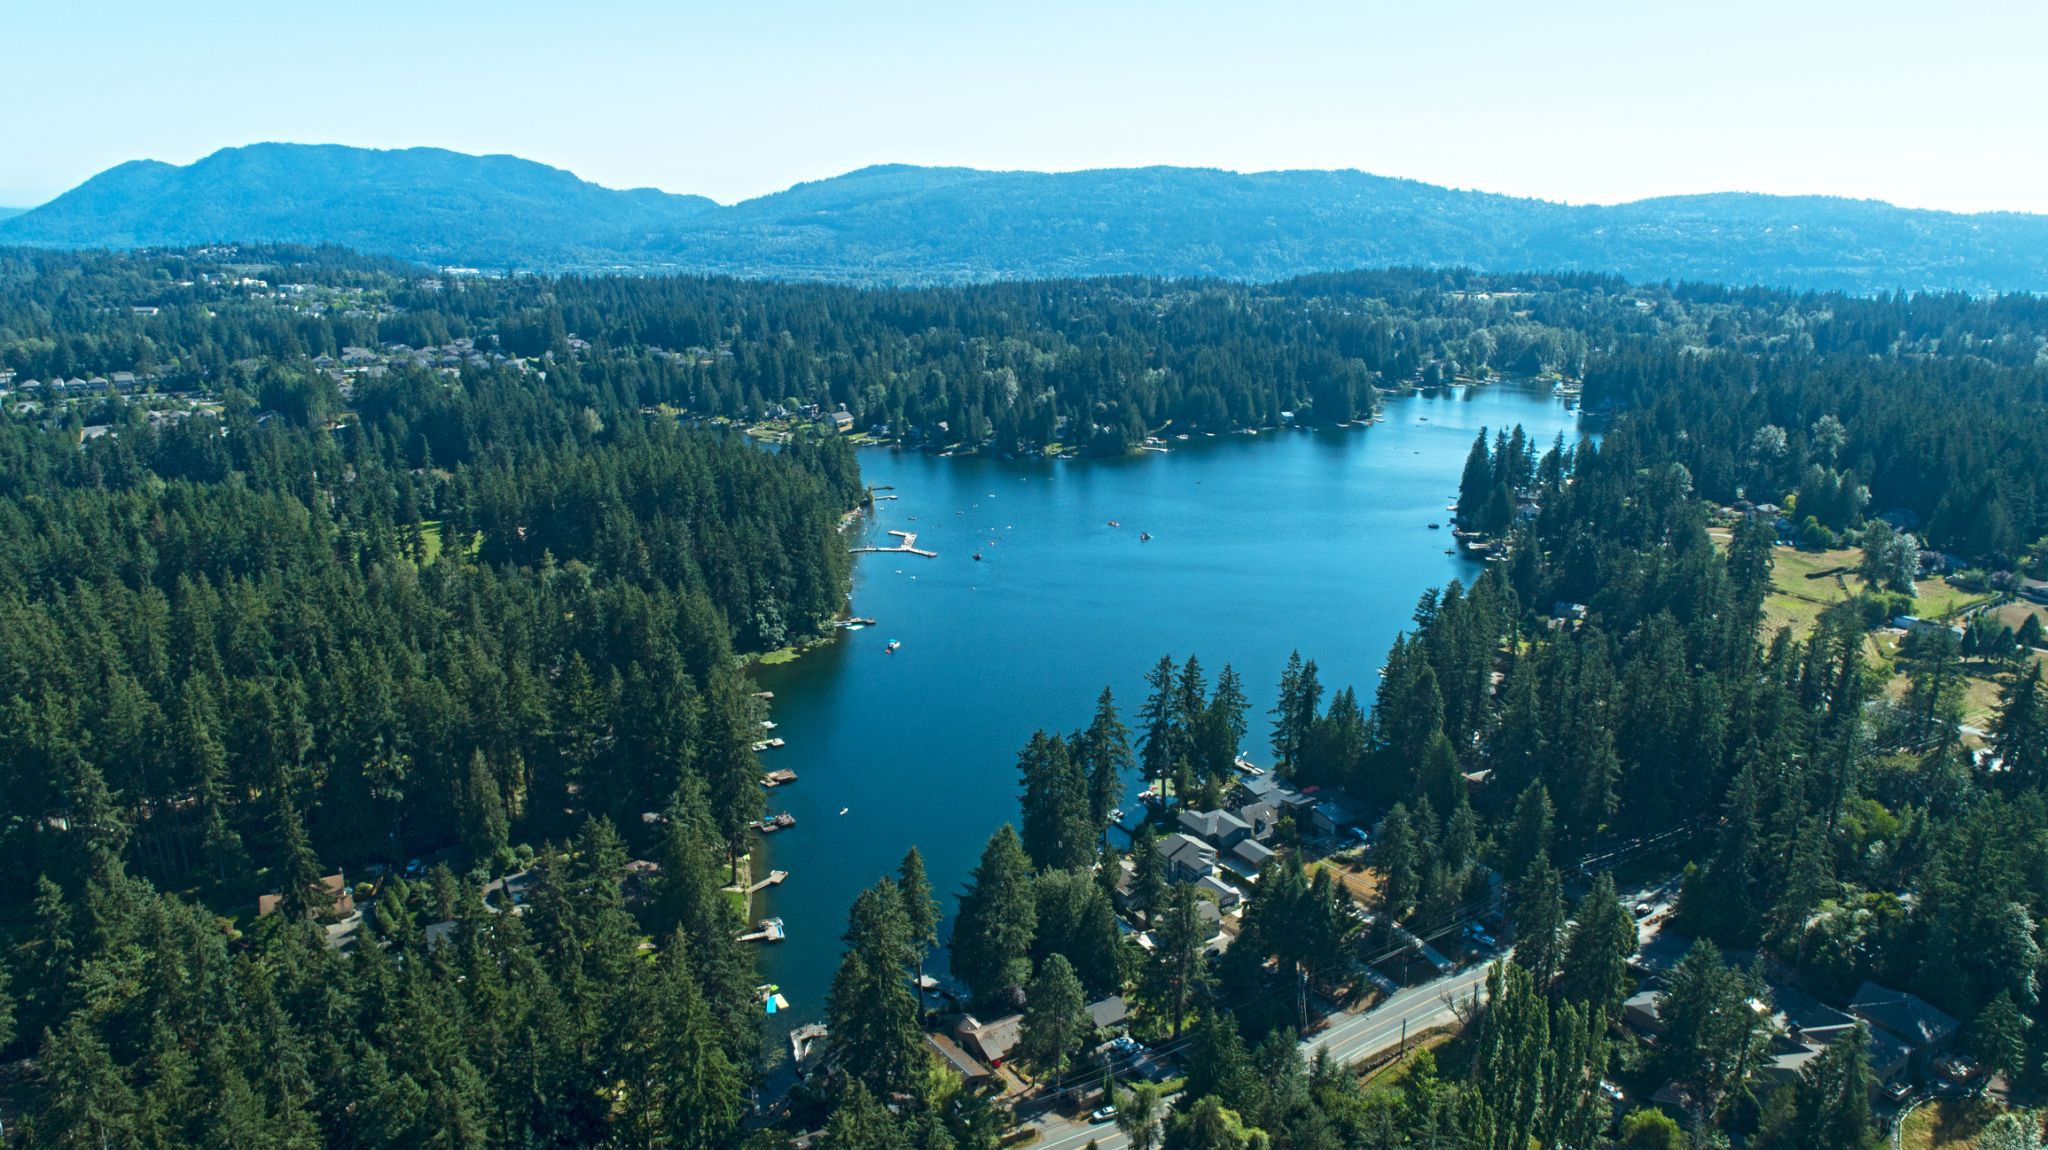  For the second year in a row, Sammamish, Washington named best small city in the US 